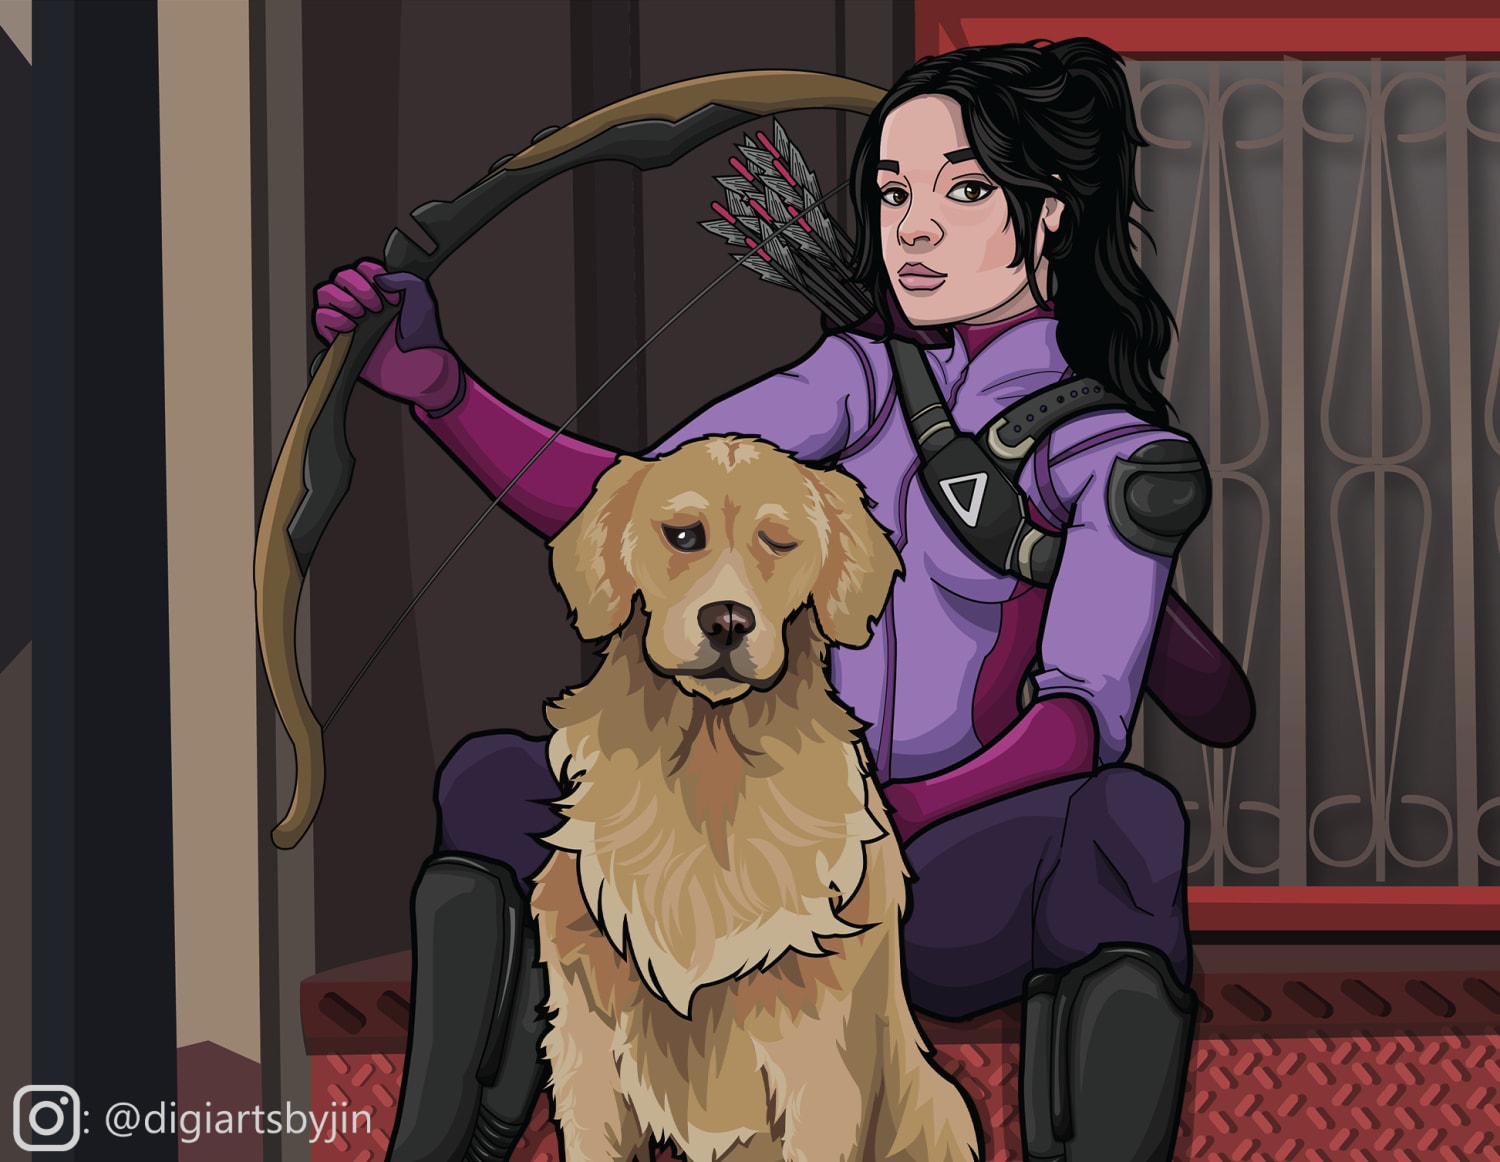 Made this fanart of Kate Bishop with Lucky the pizza dog from the HAWKEYE series! Hope you like it! :)